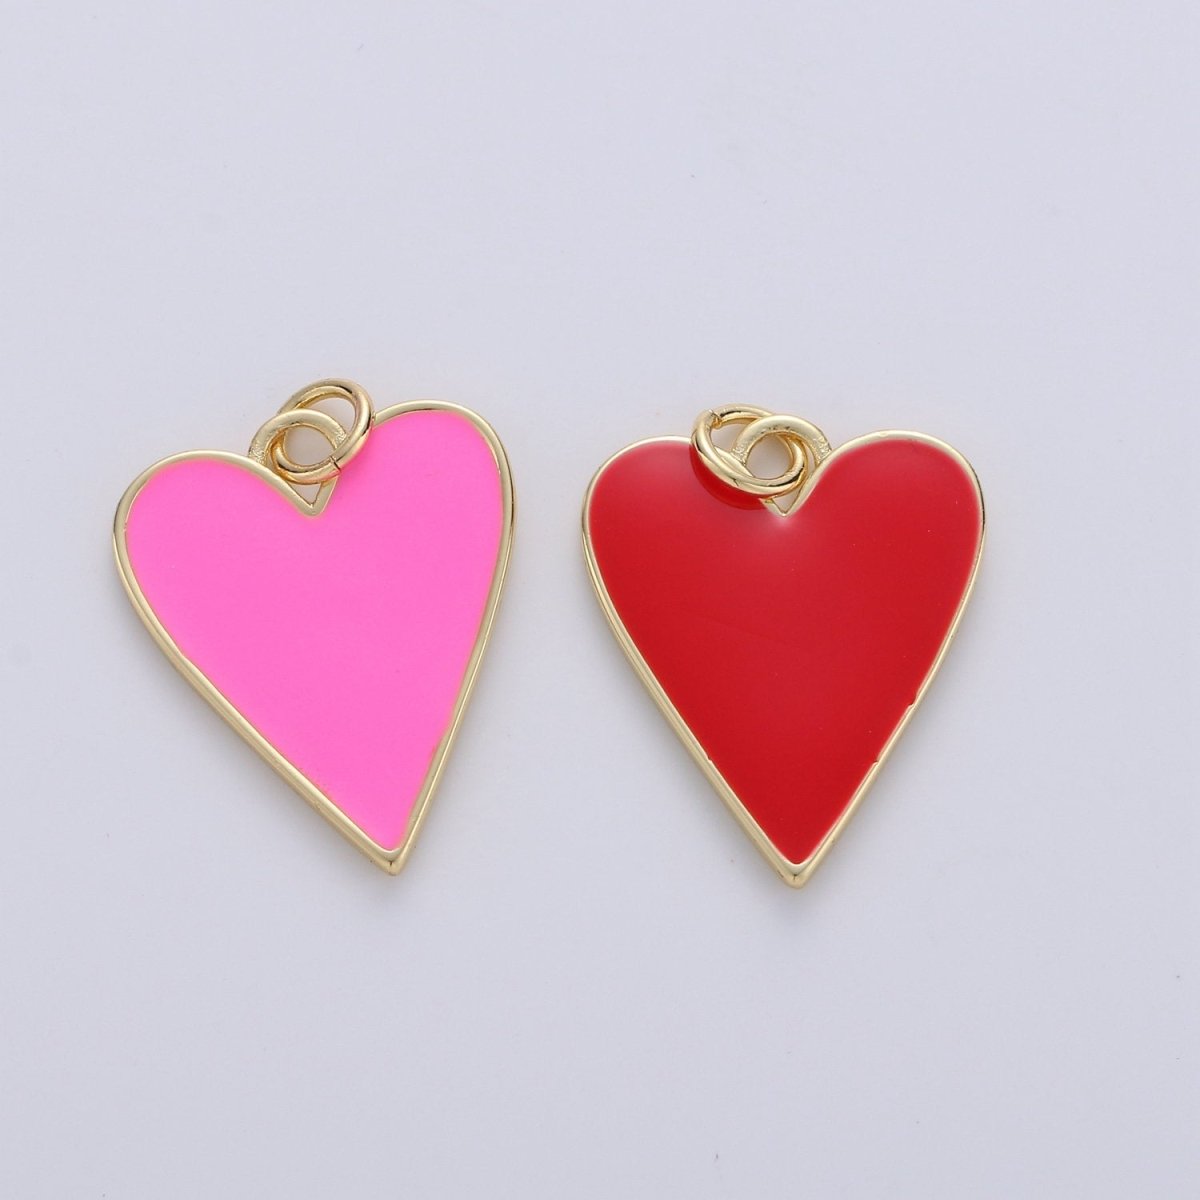 Dainty Red Heart enameled Pink enamel heart pendant, Gold Love charm for Necklace Bracelet Earring Charm Supply Relationship Jewelry D-695 D-696 - DLUXCA